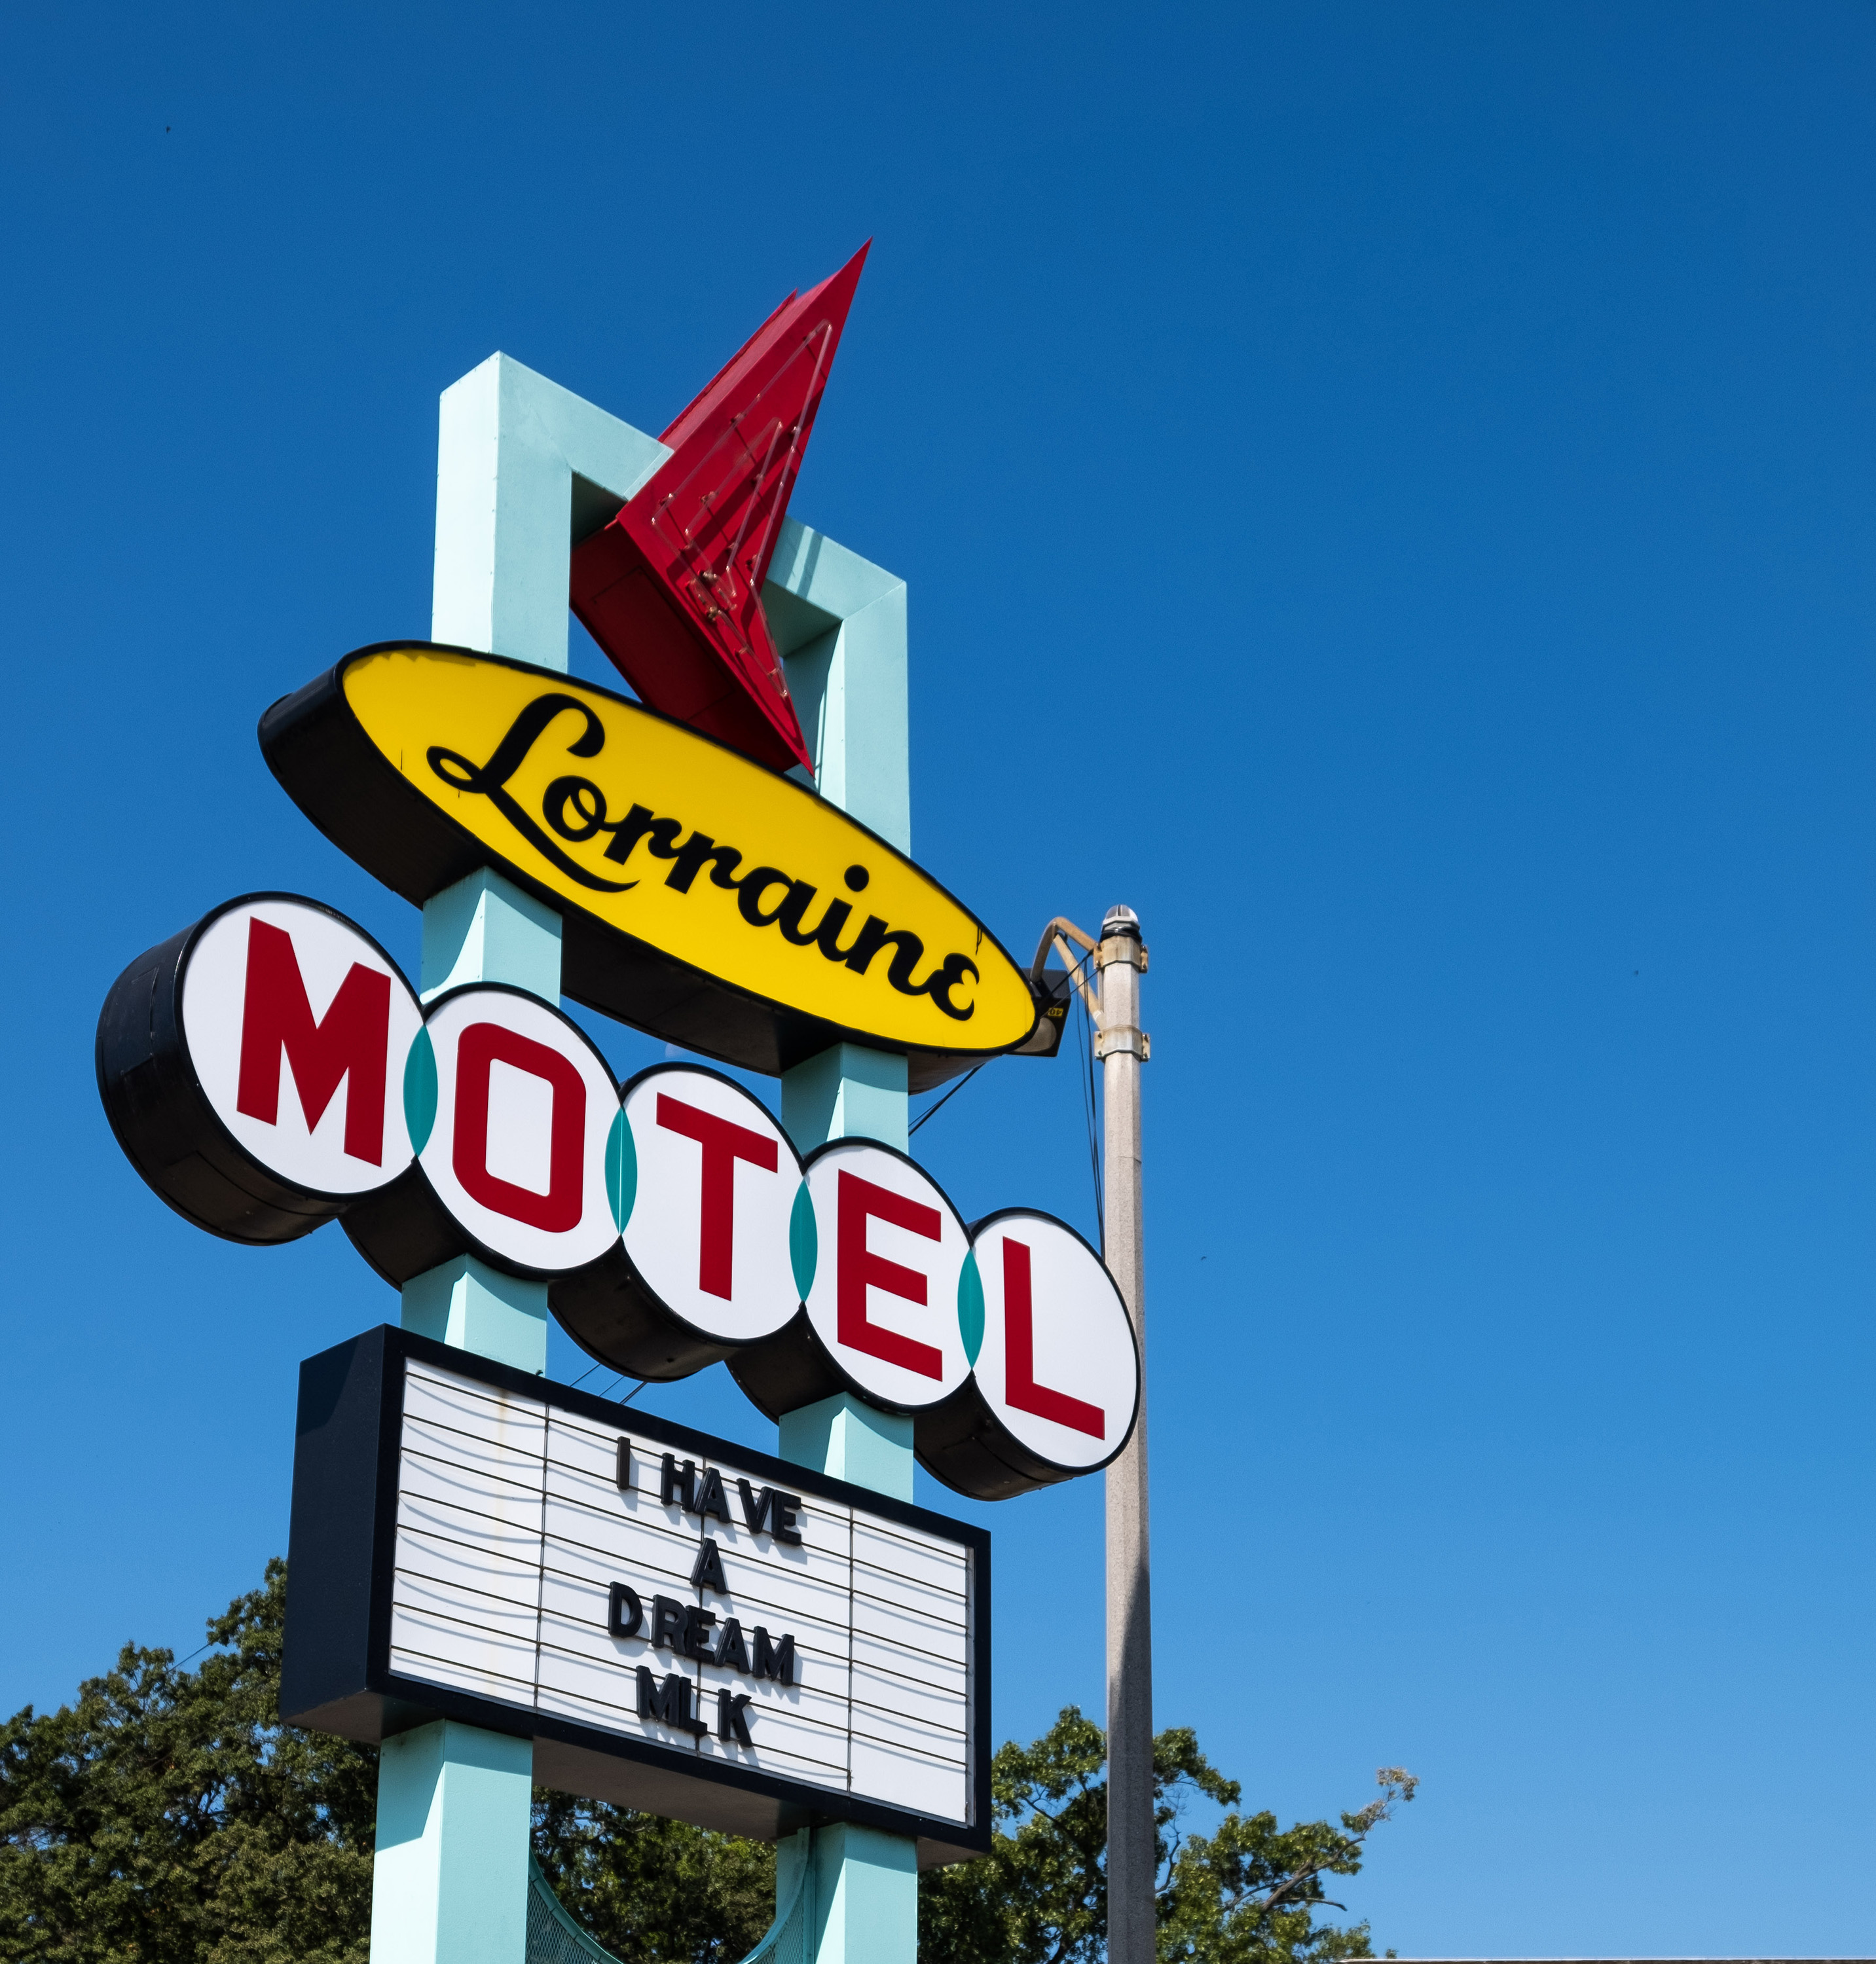 A sign for the Lorraine Motel